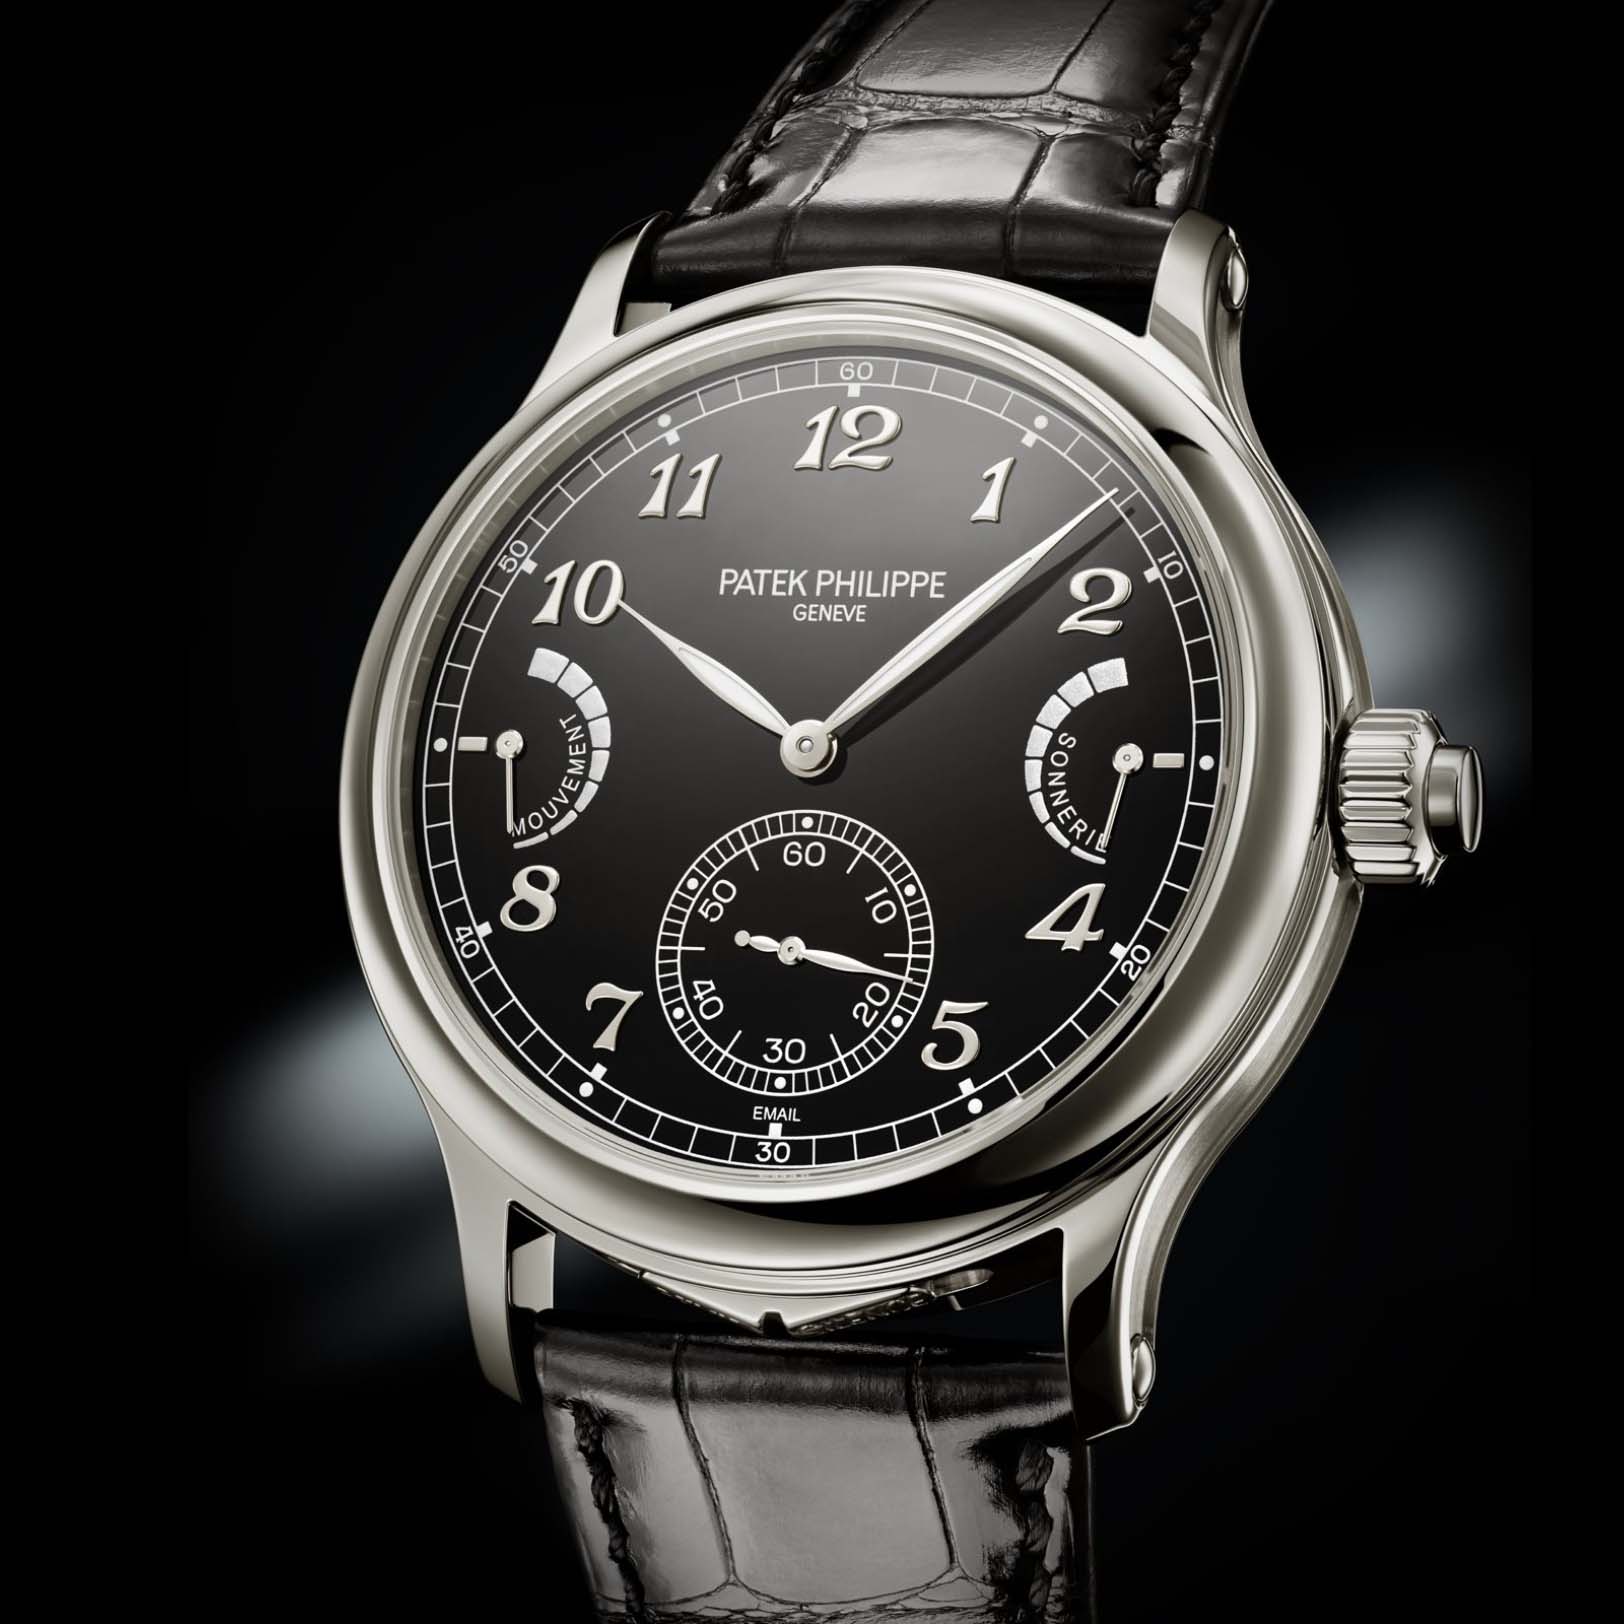 Grand Complications Grande Sonnerie Ref. 6301P gallery 8